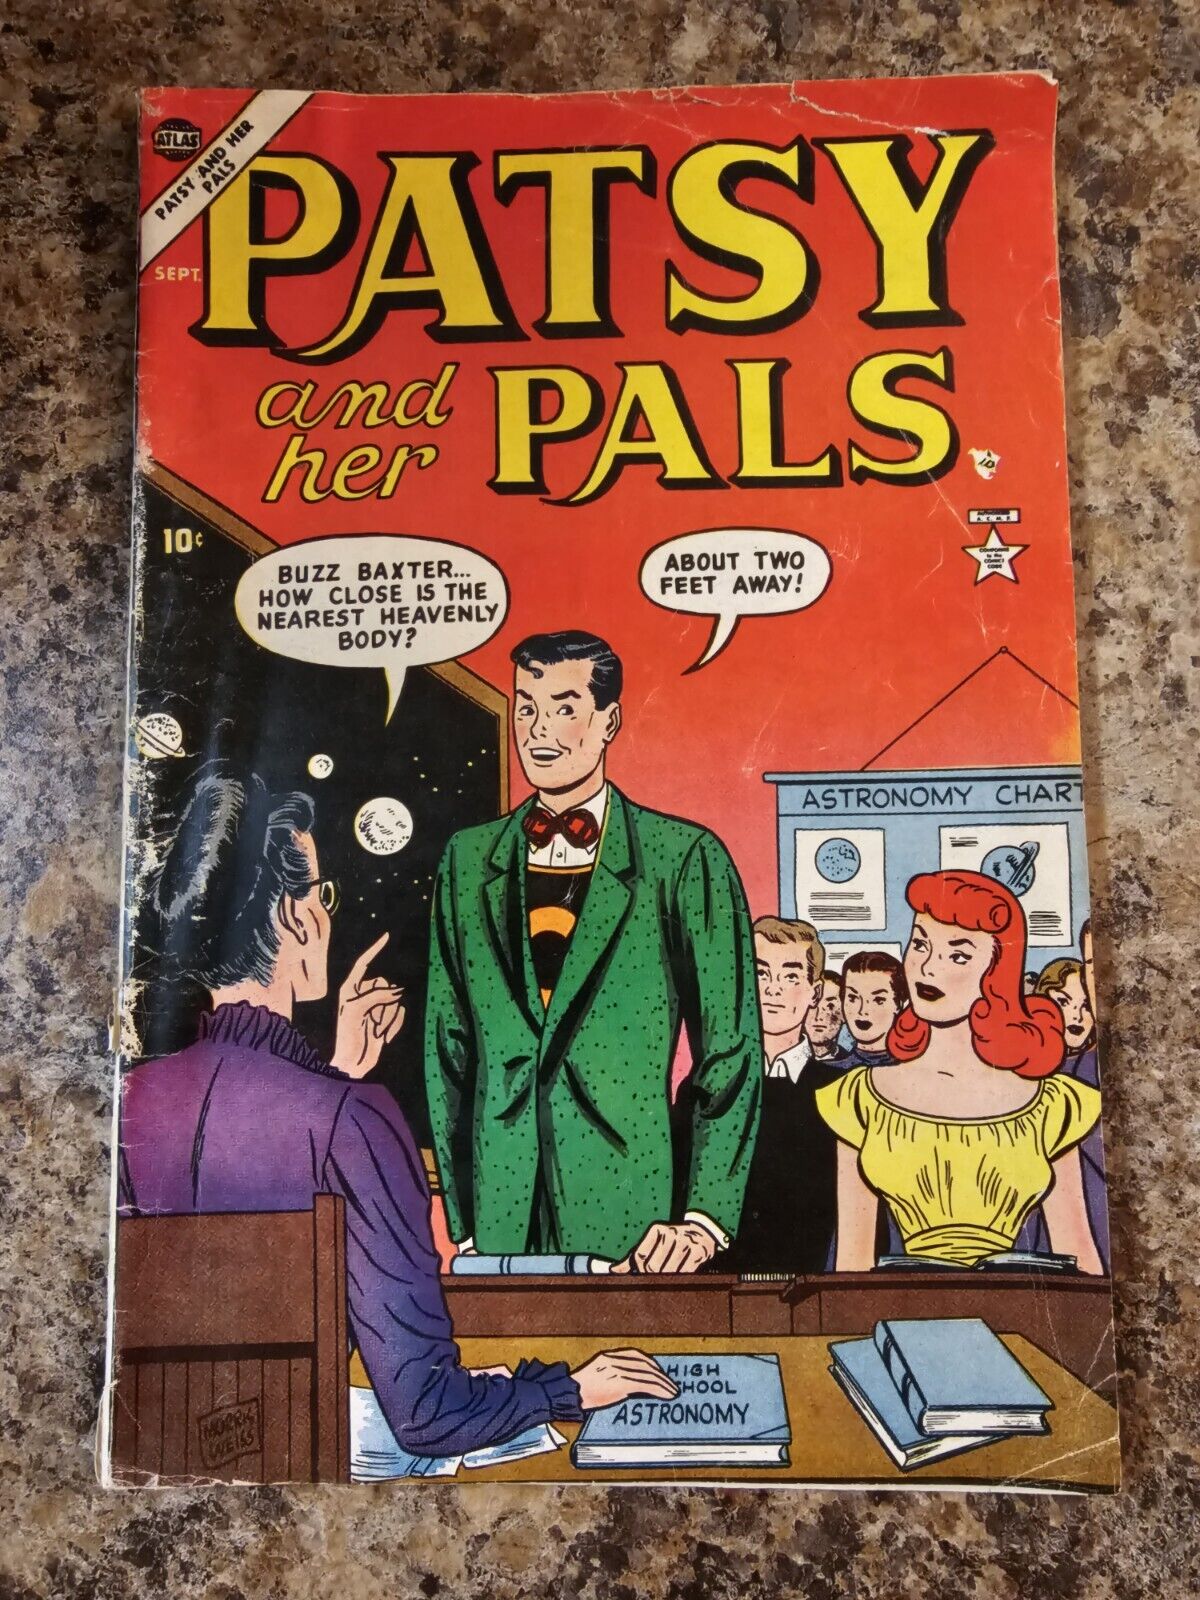 Patsy And Her Pals #3 (1953) Rare Golden Age Atlas Comics GD Stan Lee 